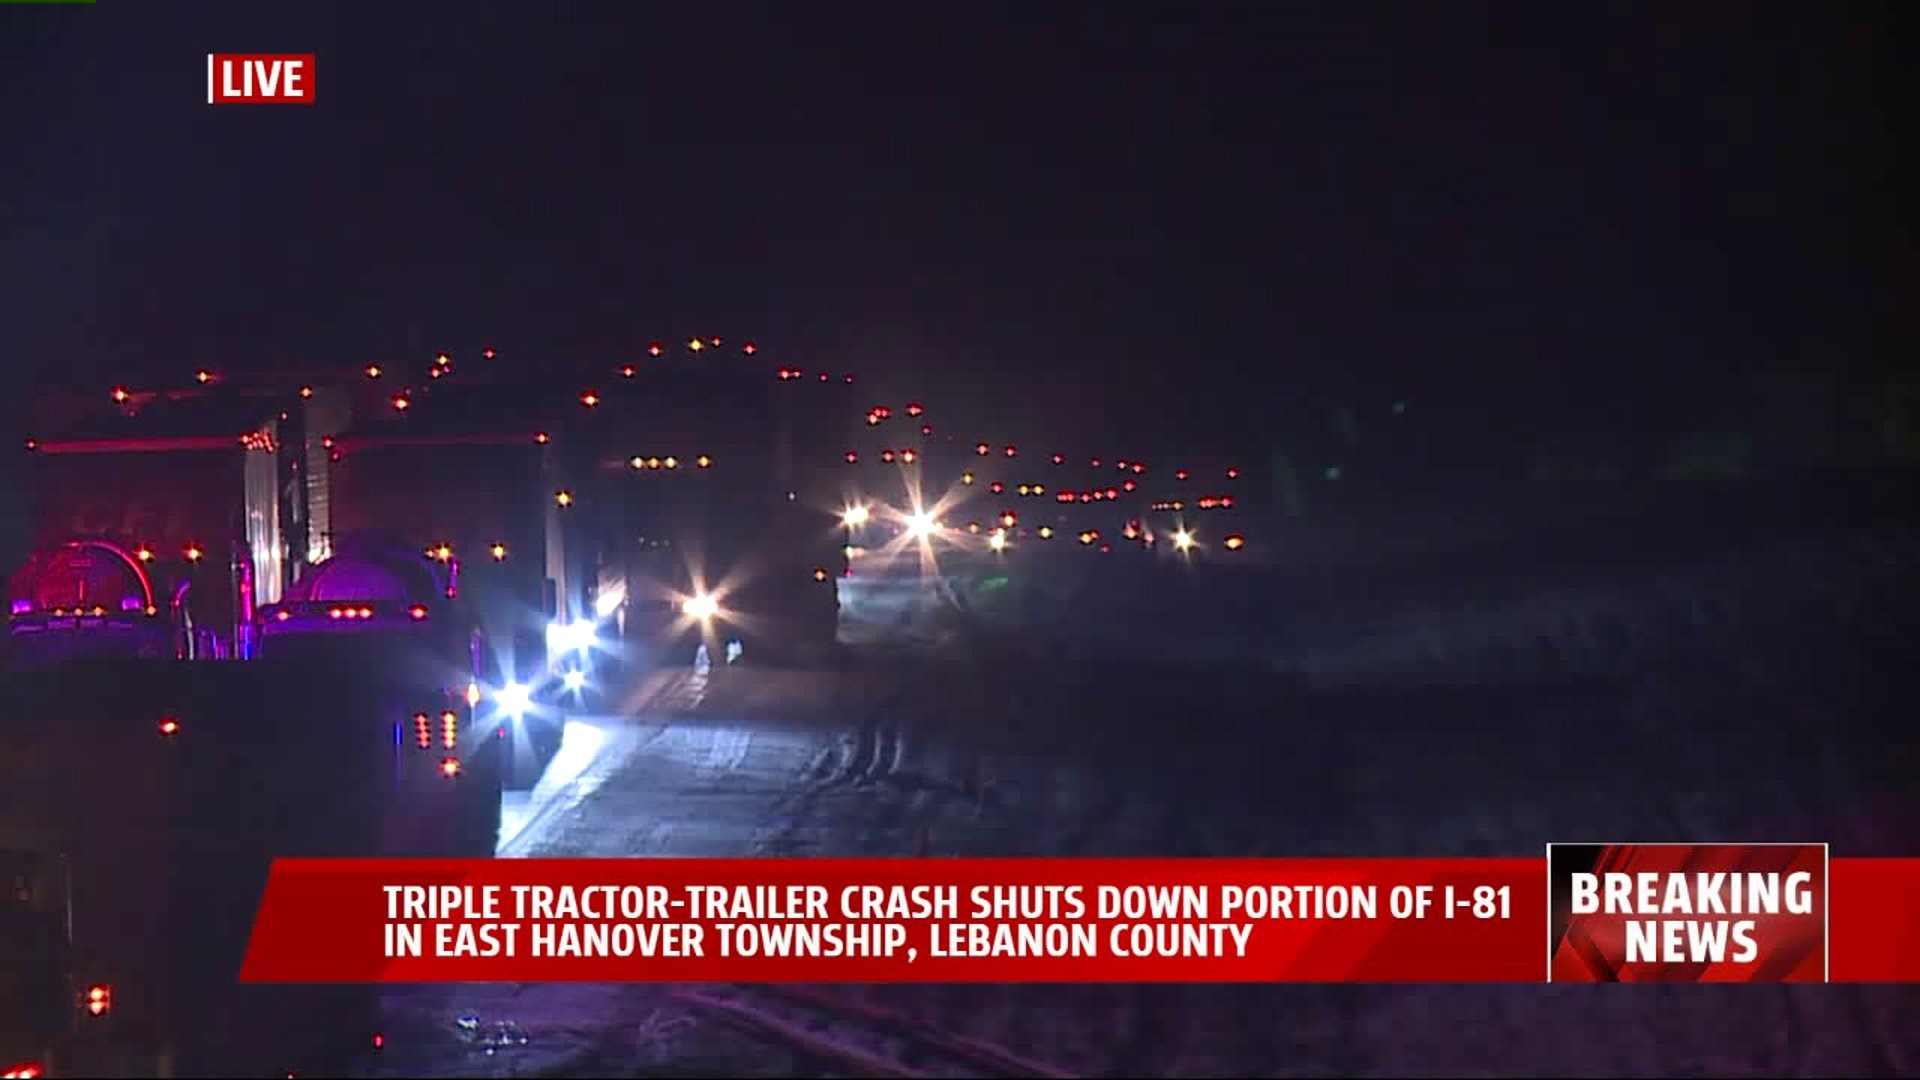 One person taken to hospital after crash involving three tractor-trailers on Interstate 81 in Lebanon County